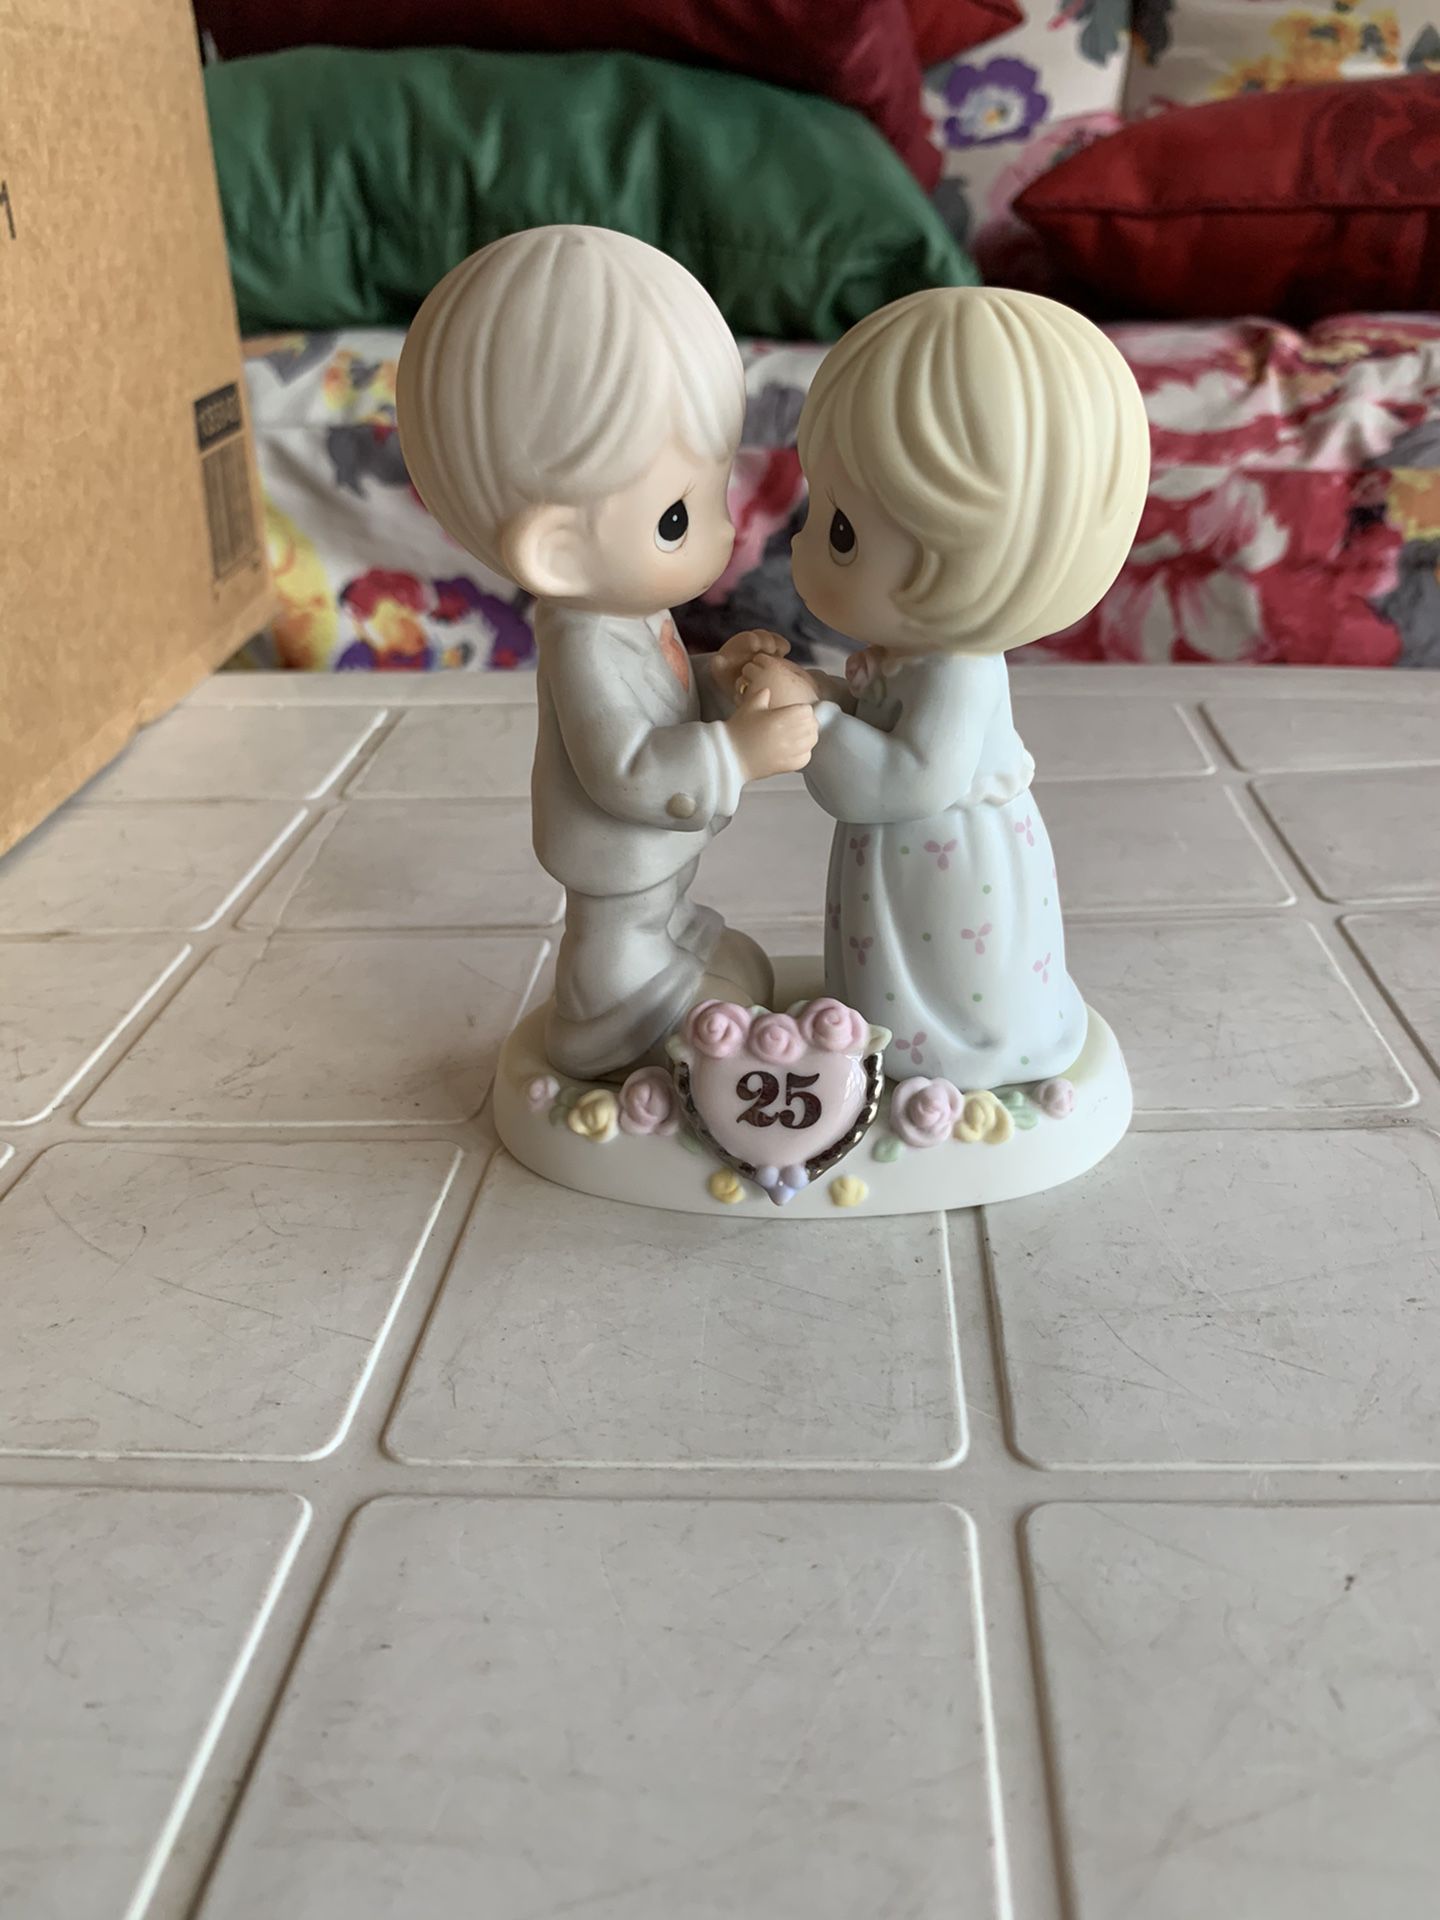 Precious Moments Wedding Anniversary 25 years Couple Figurine “Our Love Still Sparkles In Your Eyes”